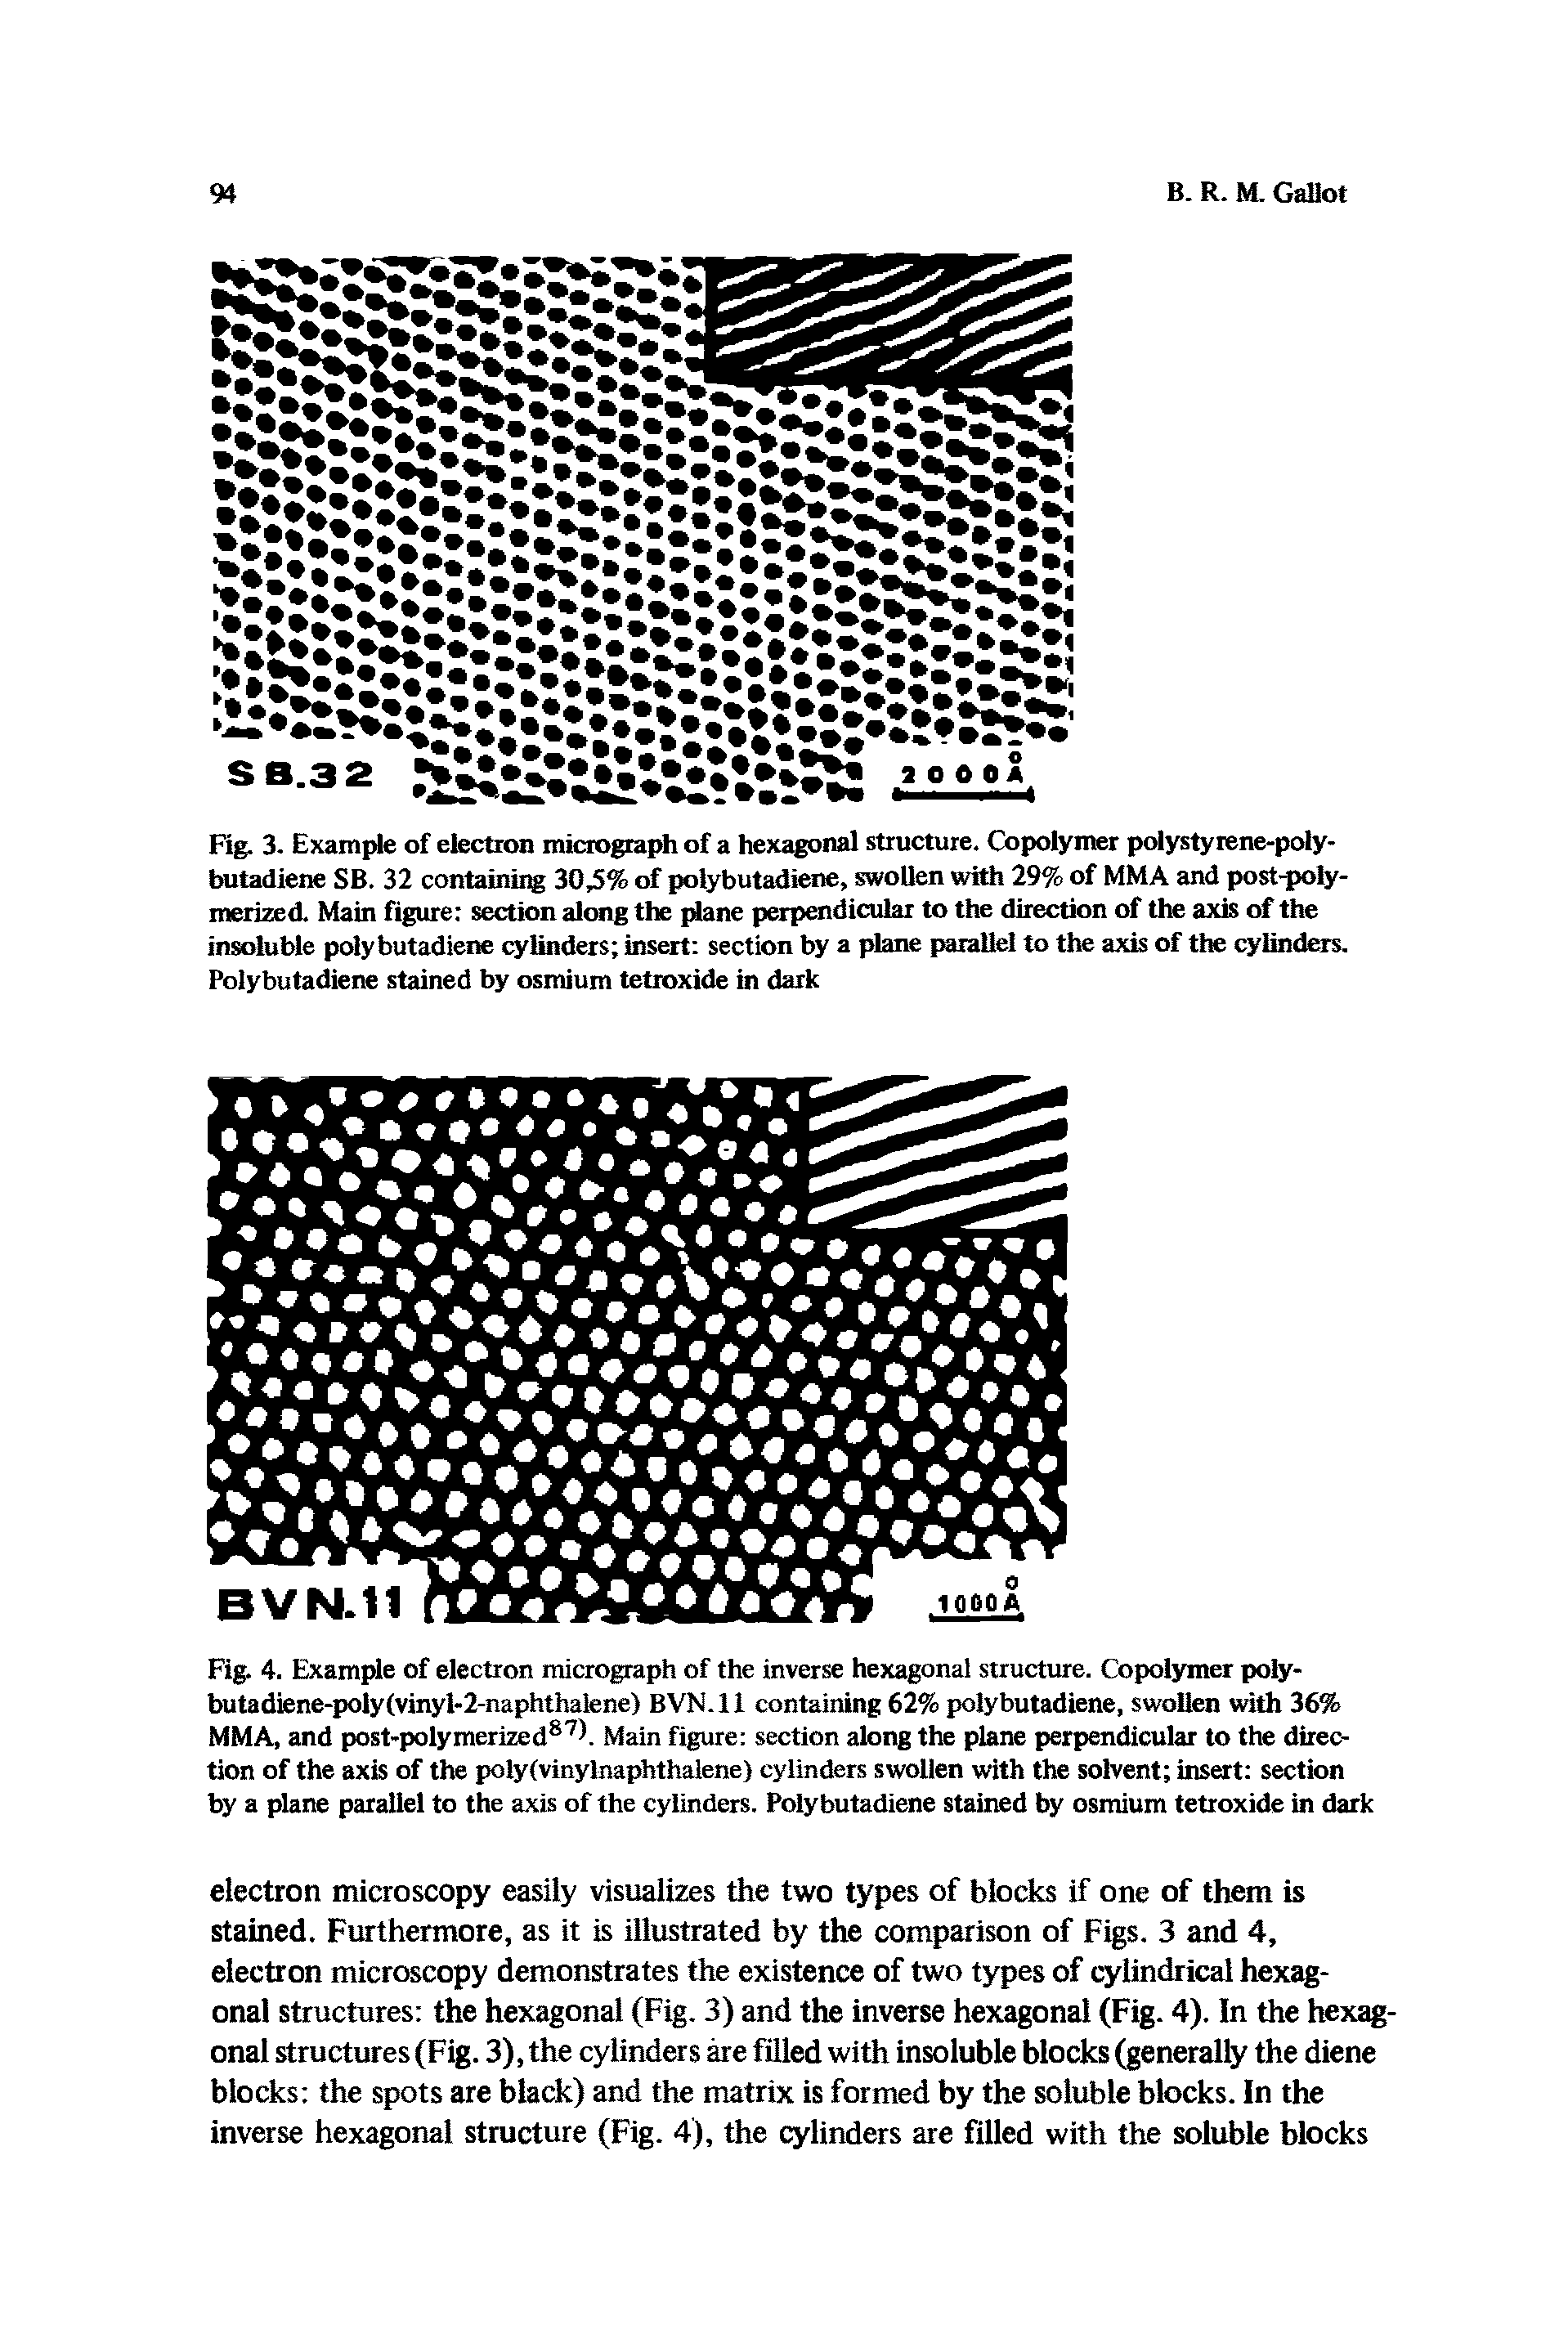 Fig. 4. Example of electron micrograph of the inverse hexagonal structure. Copolymer poly-butadiene-poly(vinyl-2-naphthalene) BVN.ll containing 62% polybutadiene, swollen with 36% MMA, and post-polymerized87. Main figure section along the plane perpendicular to the direction of the axis of the poly(vinylnaphthalene) cylinders swollen with the solvent insert section by a plane parallel to the axis of the cylinders. Poly butadiene stained by osmium tetroxide in dark...